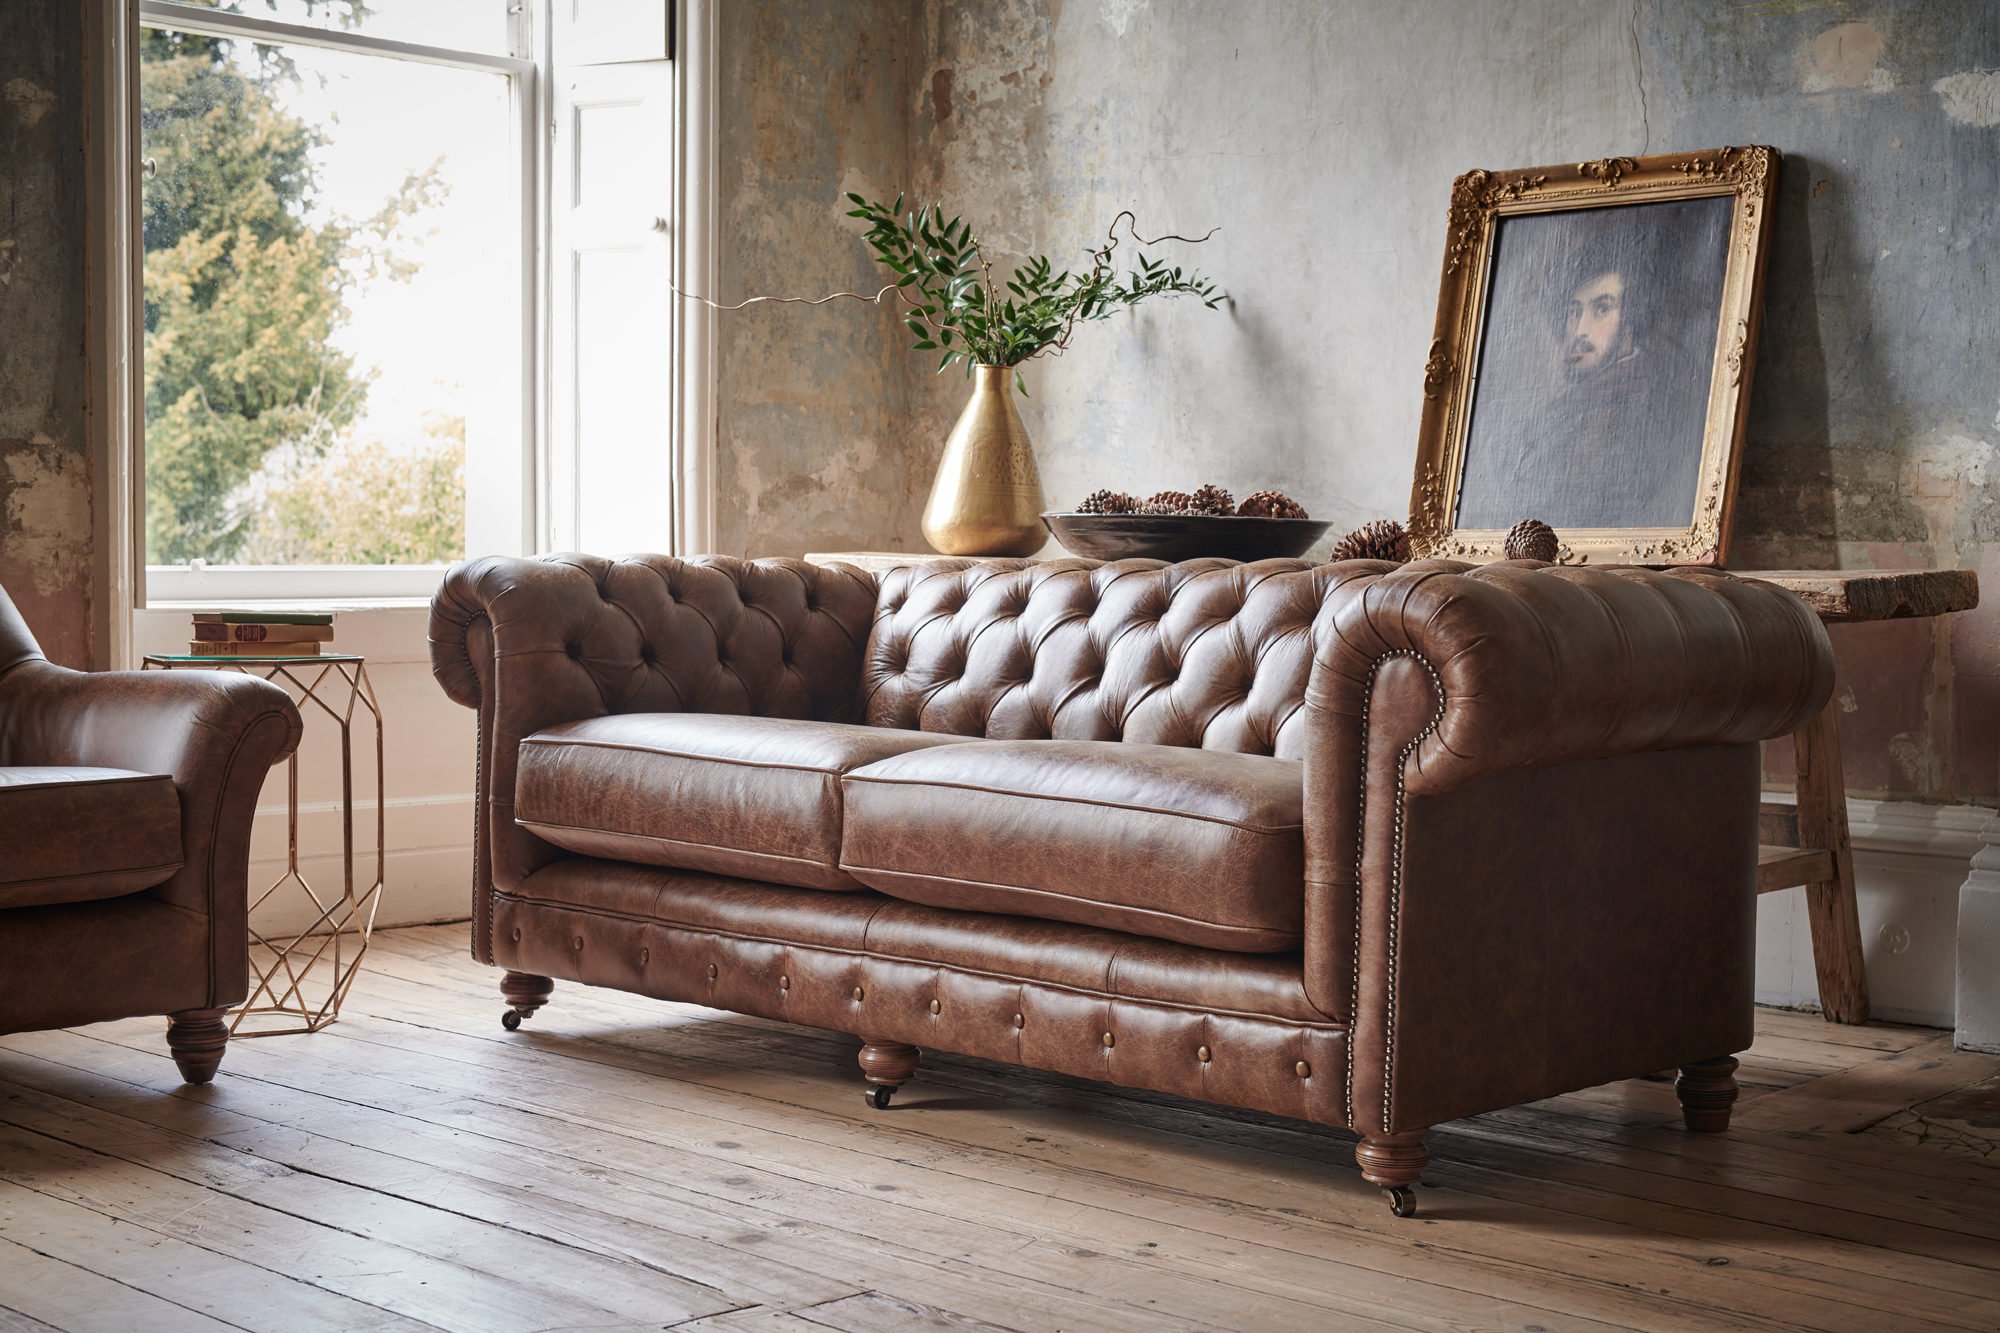 darby home tanisha leather chesterfield sofa